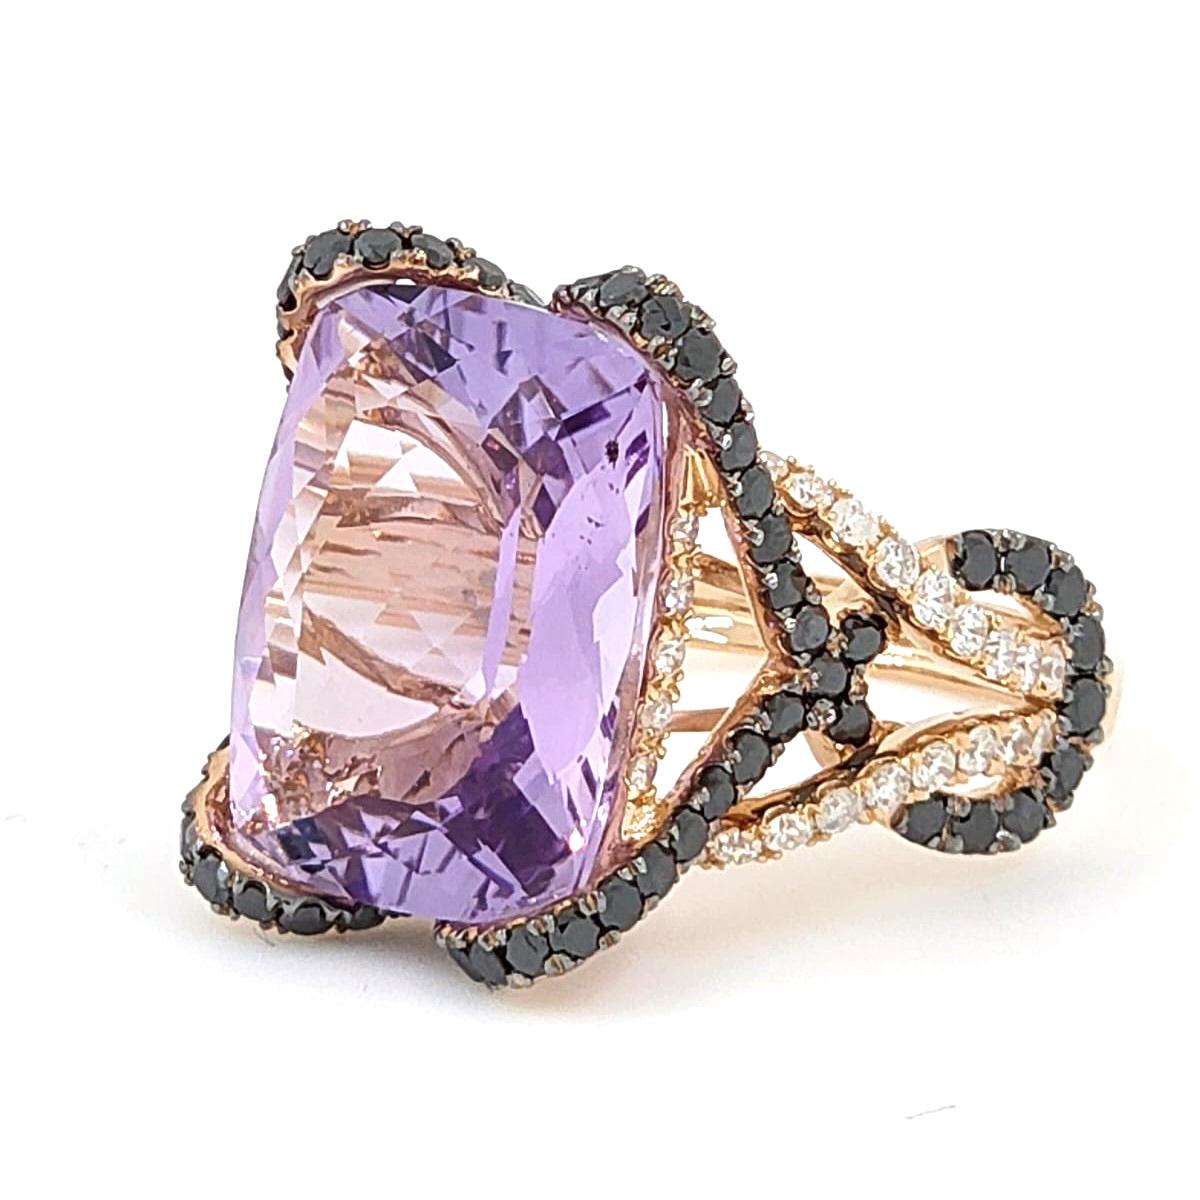 Contemporary Vintage 9.71 Carat Amethyst with White & Black Diamond Ring 18 Karat Rose Gold For Sale